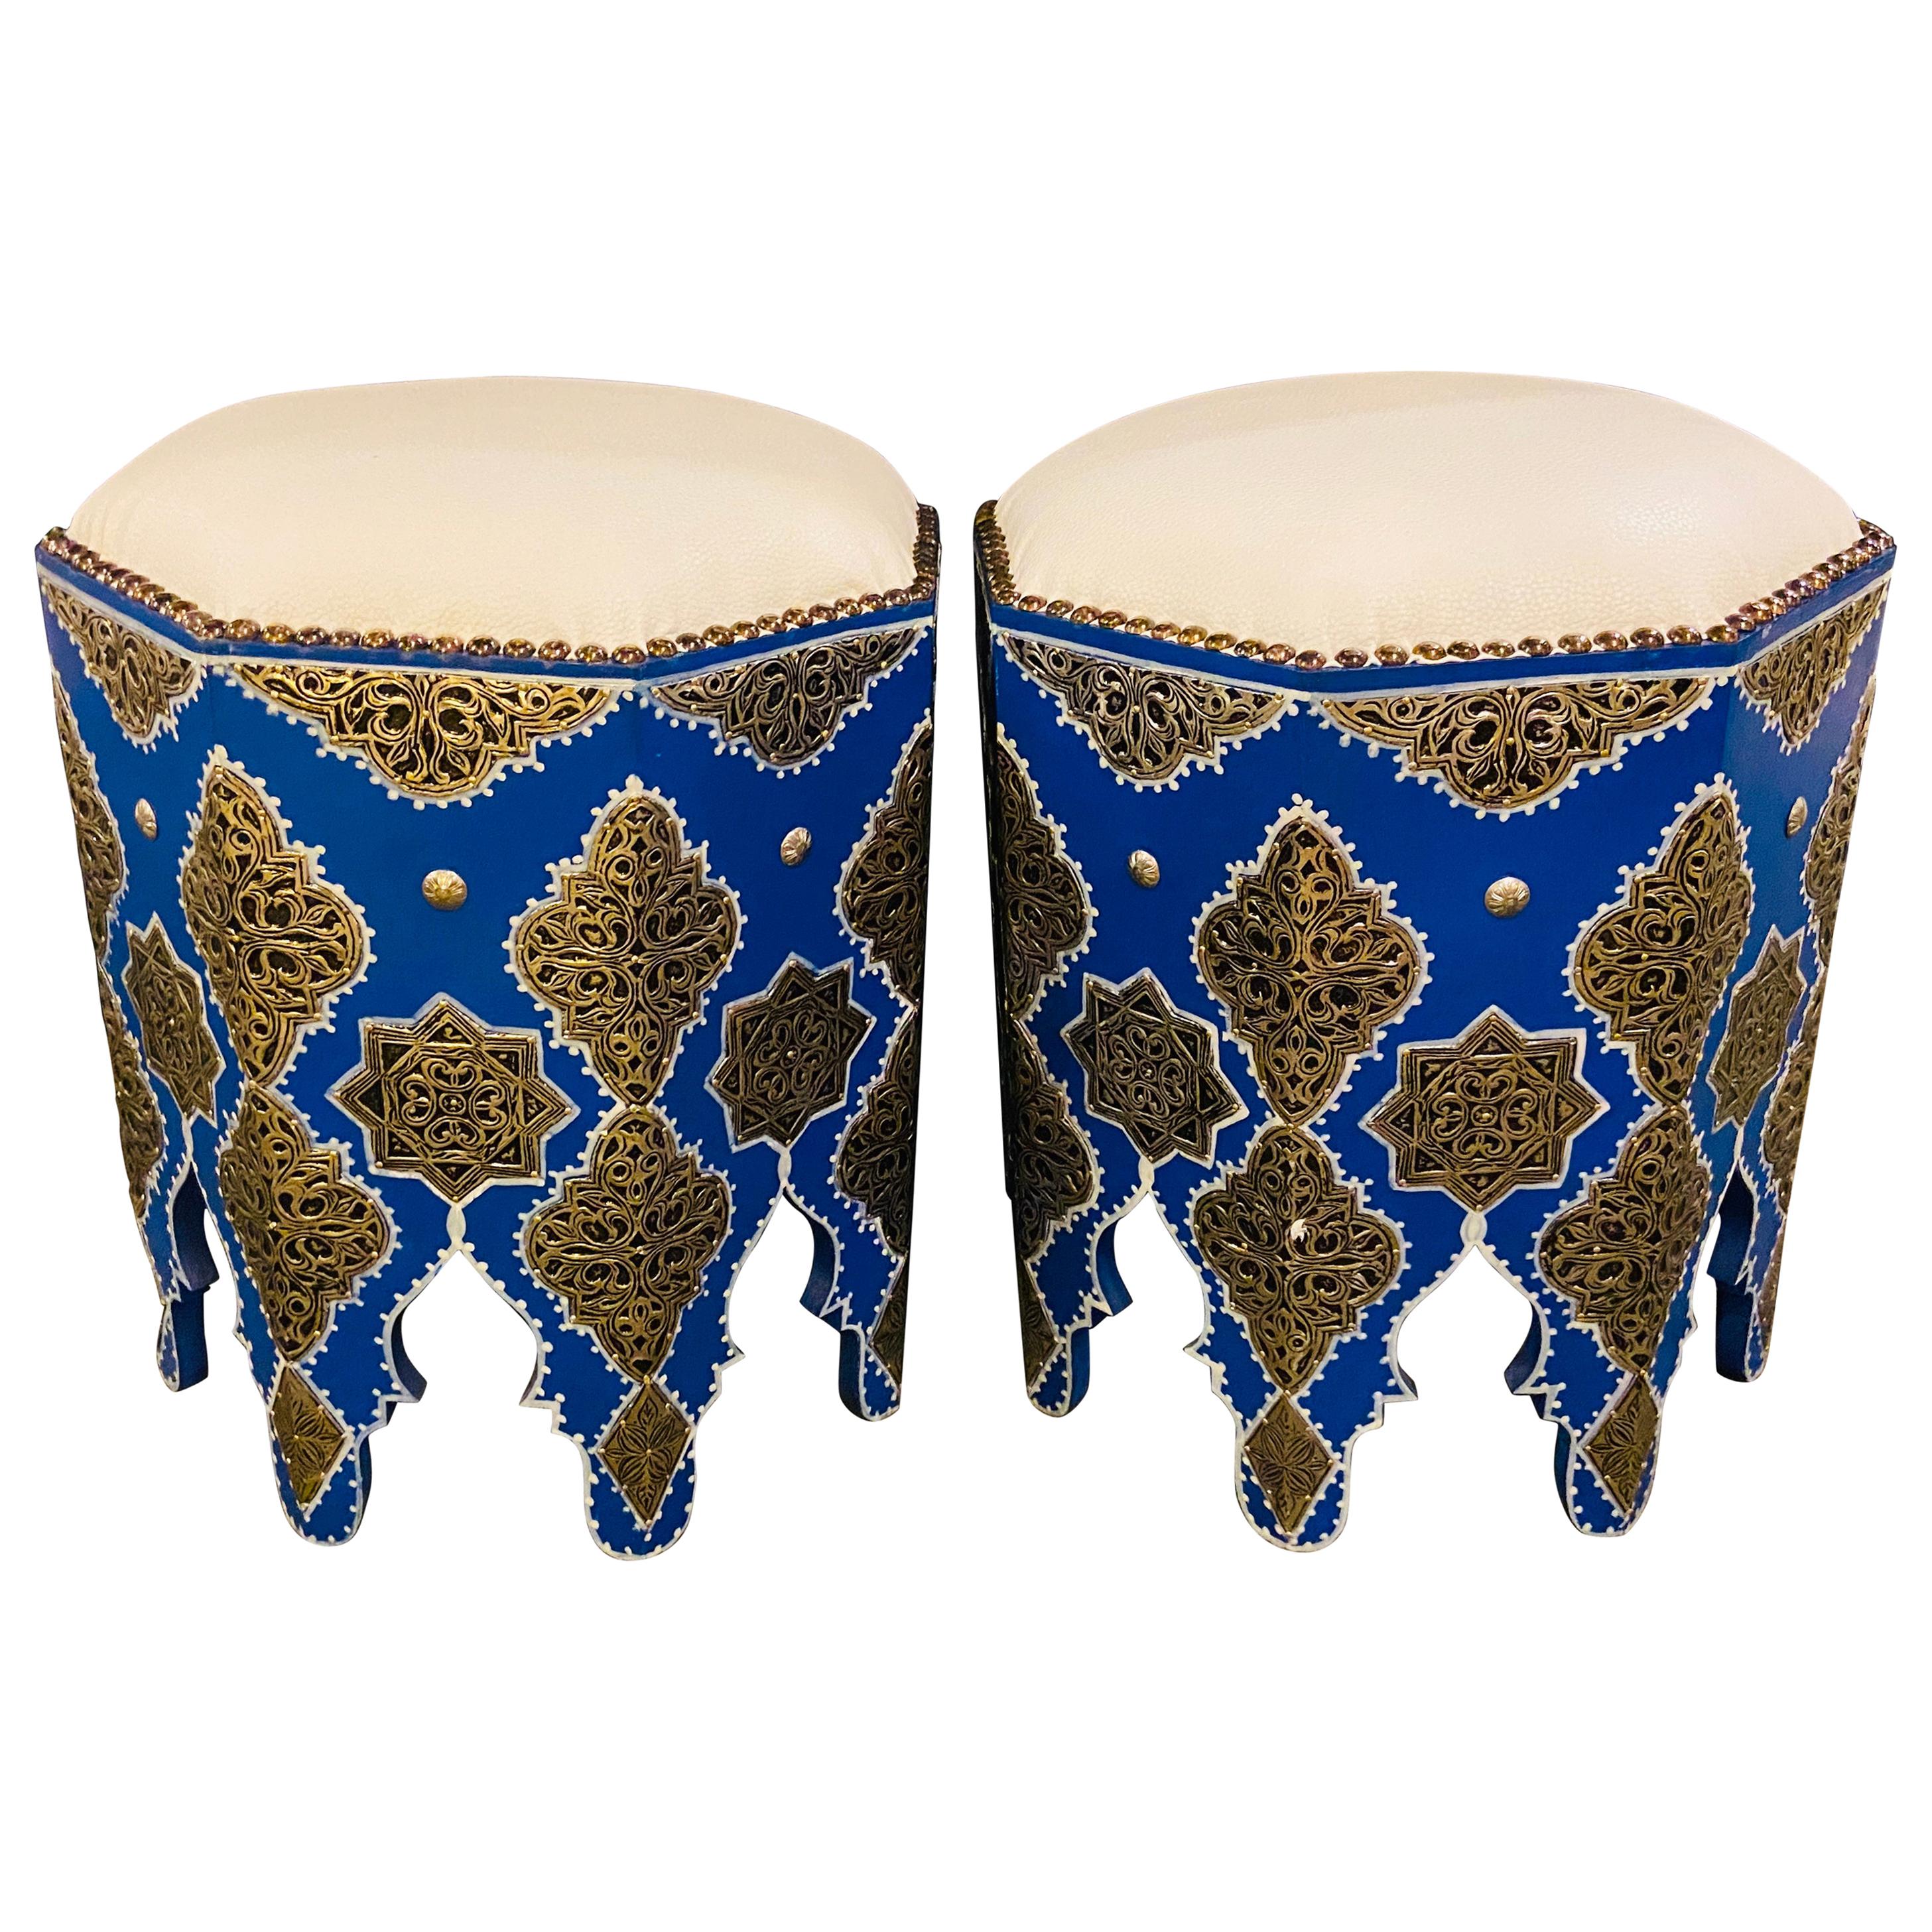 Moroccan Blue Stool or Ottoman with White Leather Top, a Pair